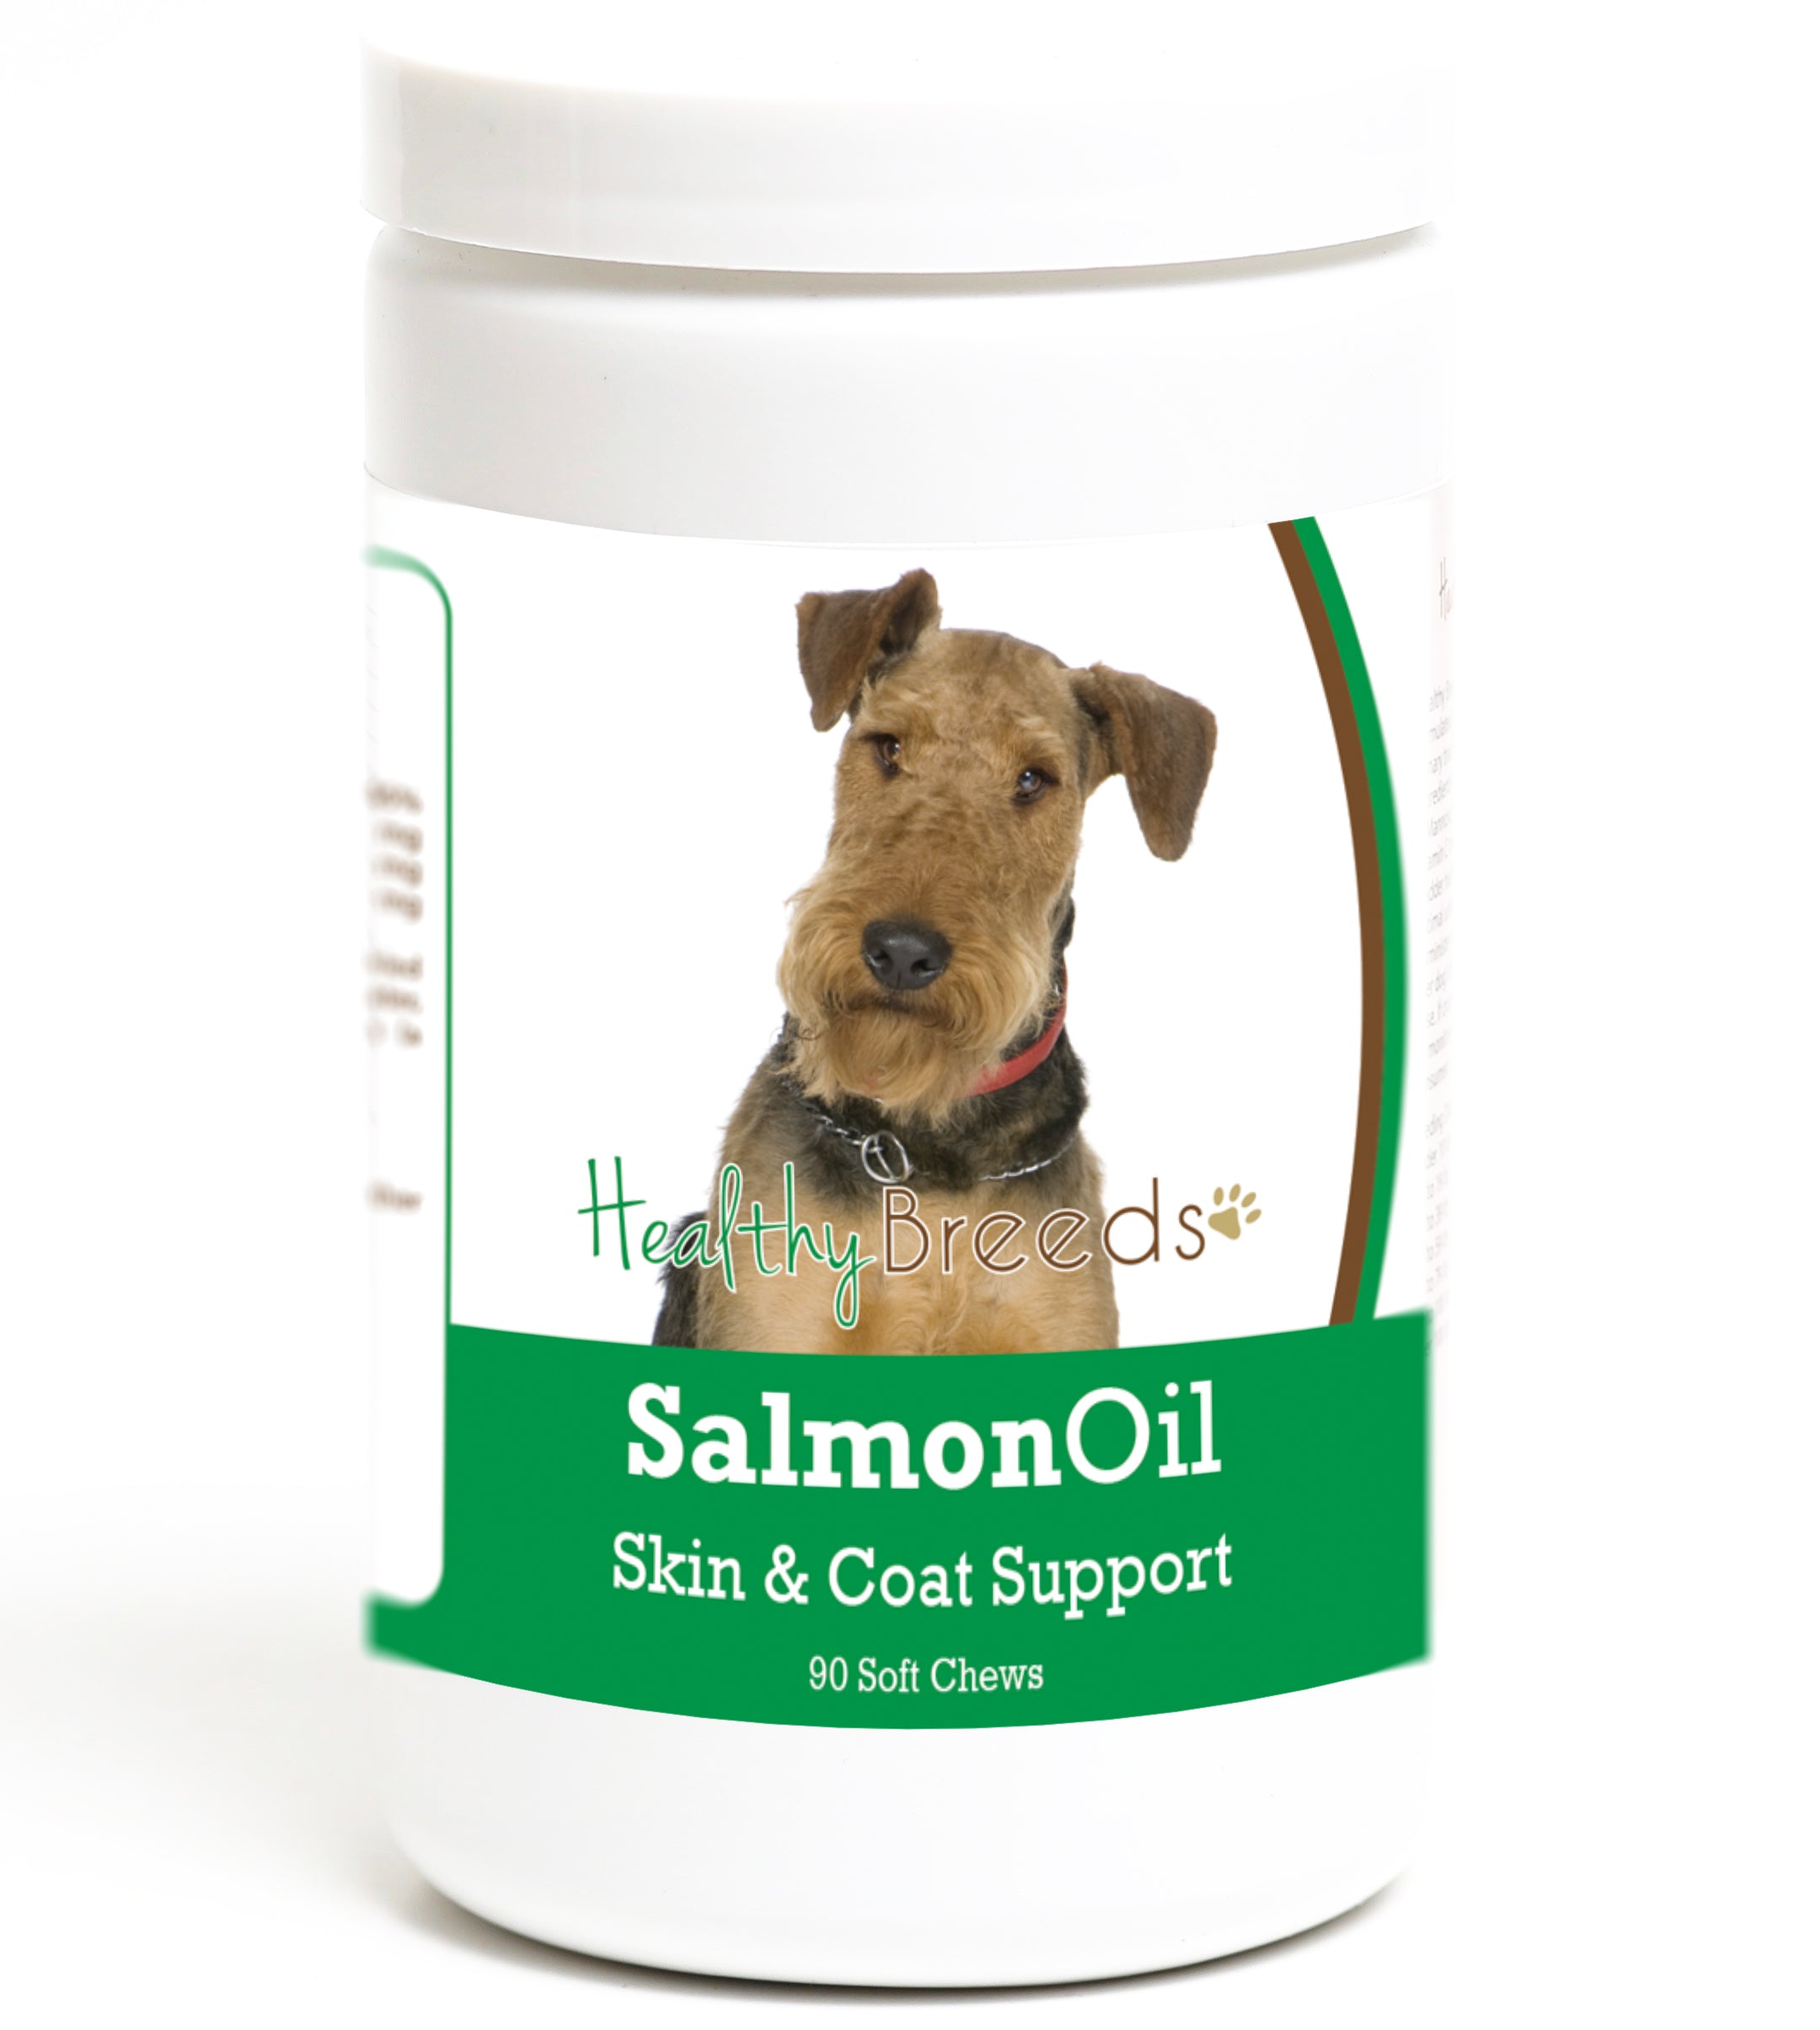 Airedale Terrier Salmon Oil Soft Chews 90 Count